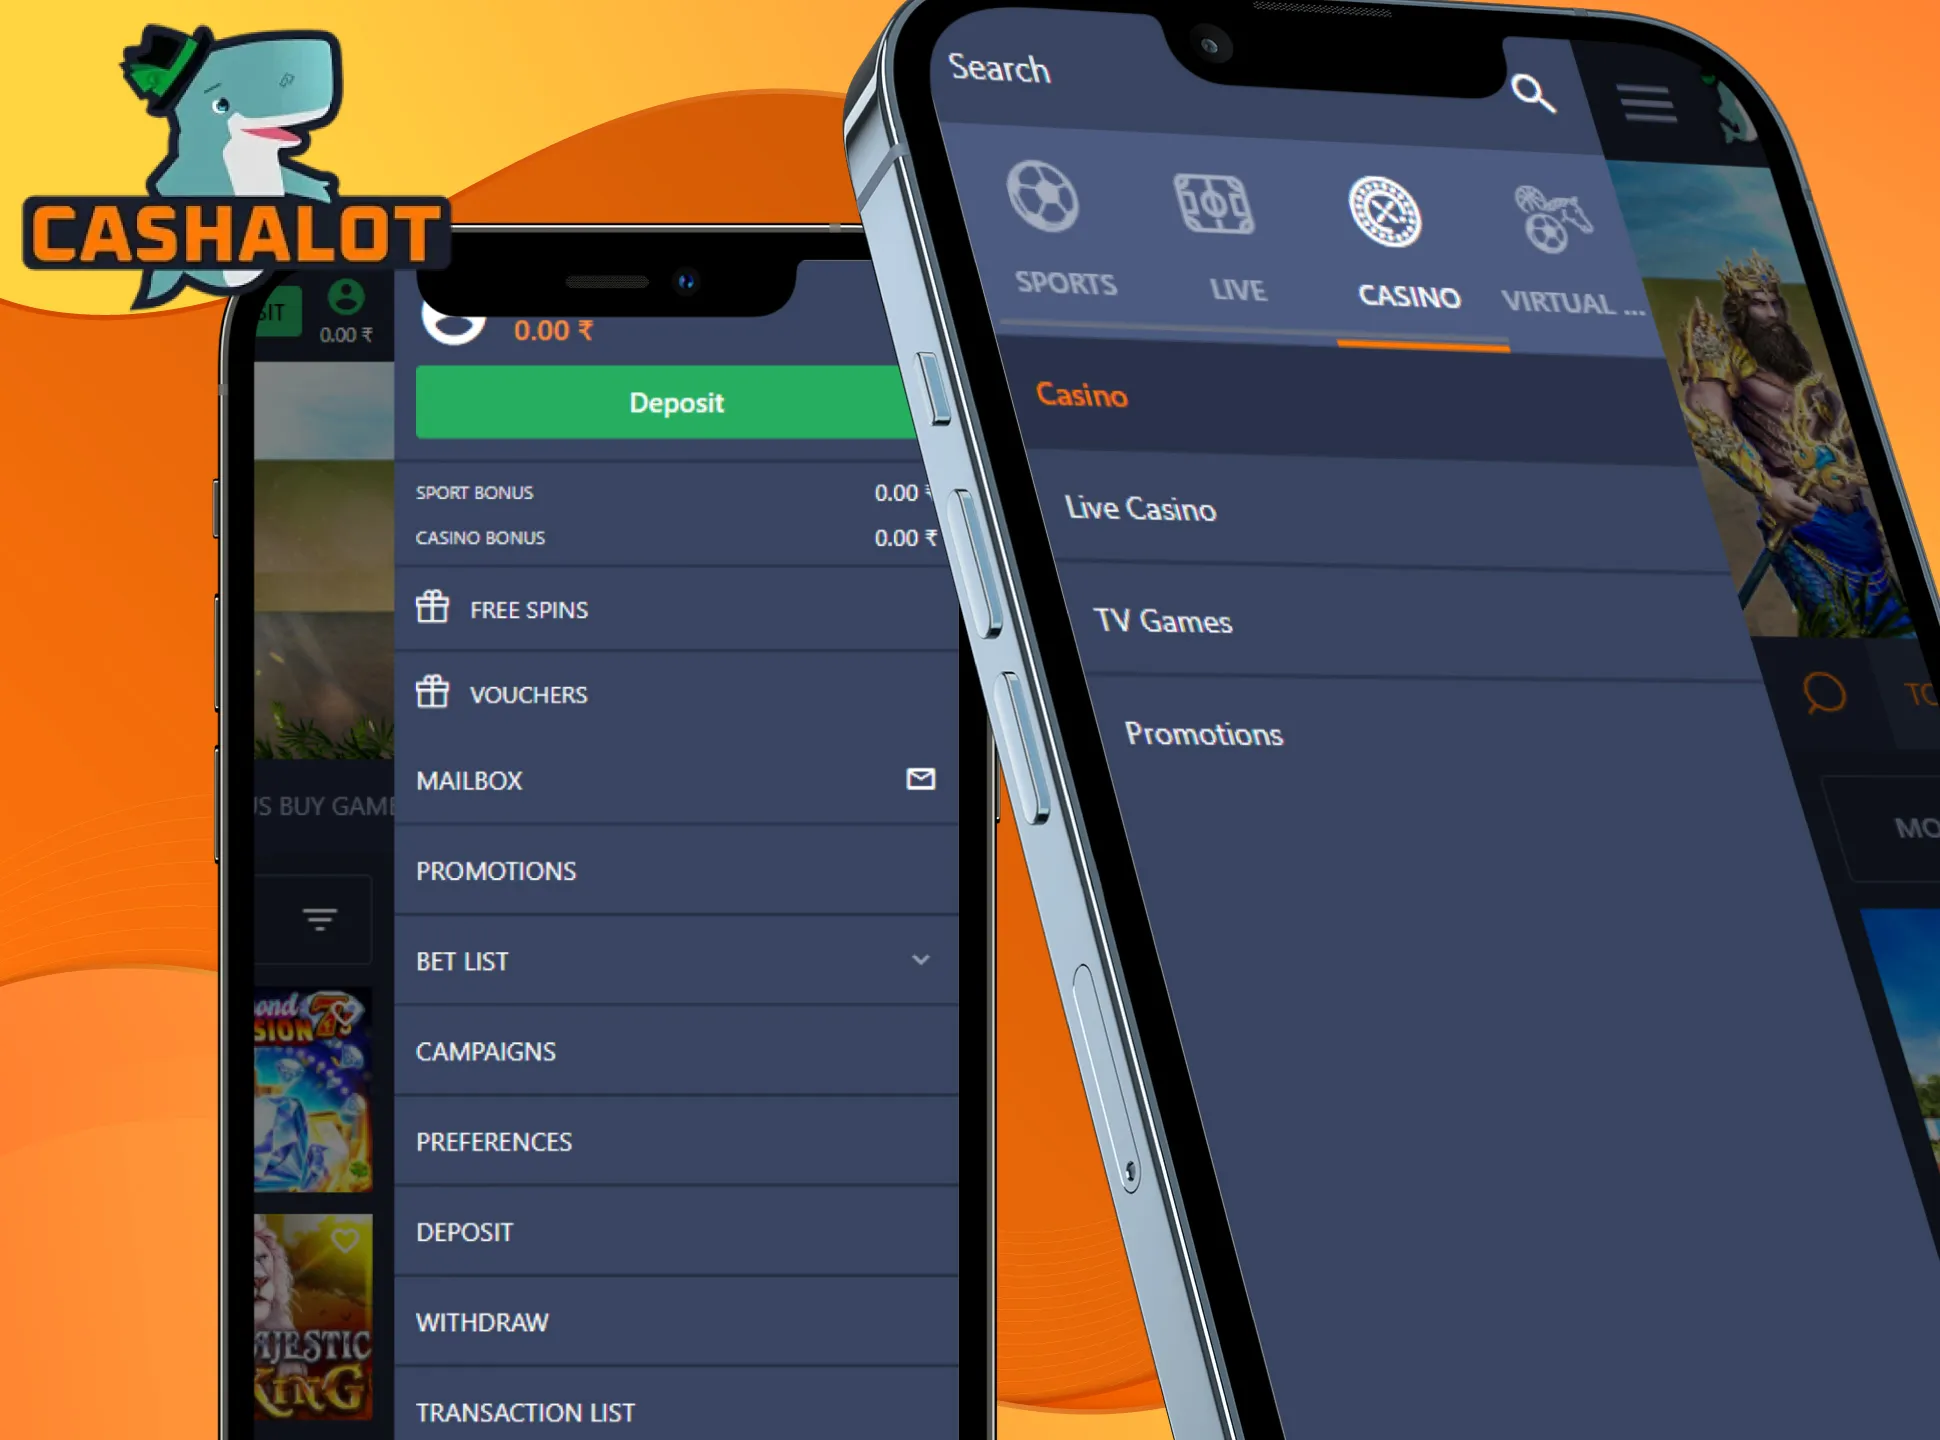 Learn more about the features of the Cashalot app by using it.